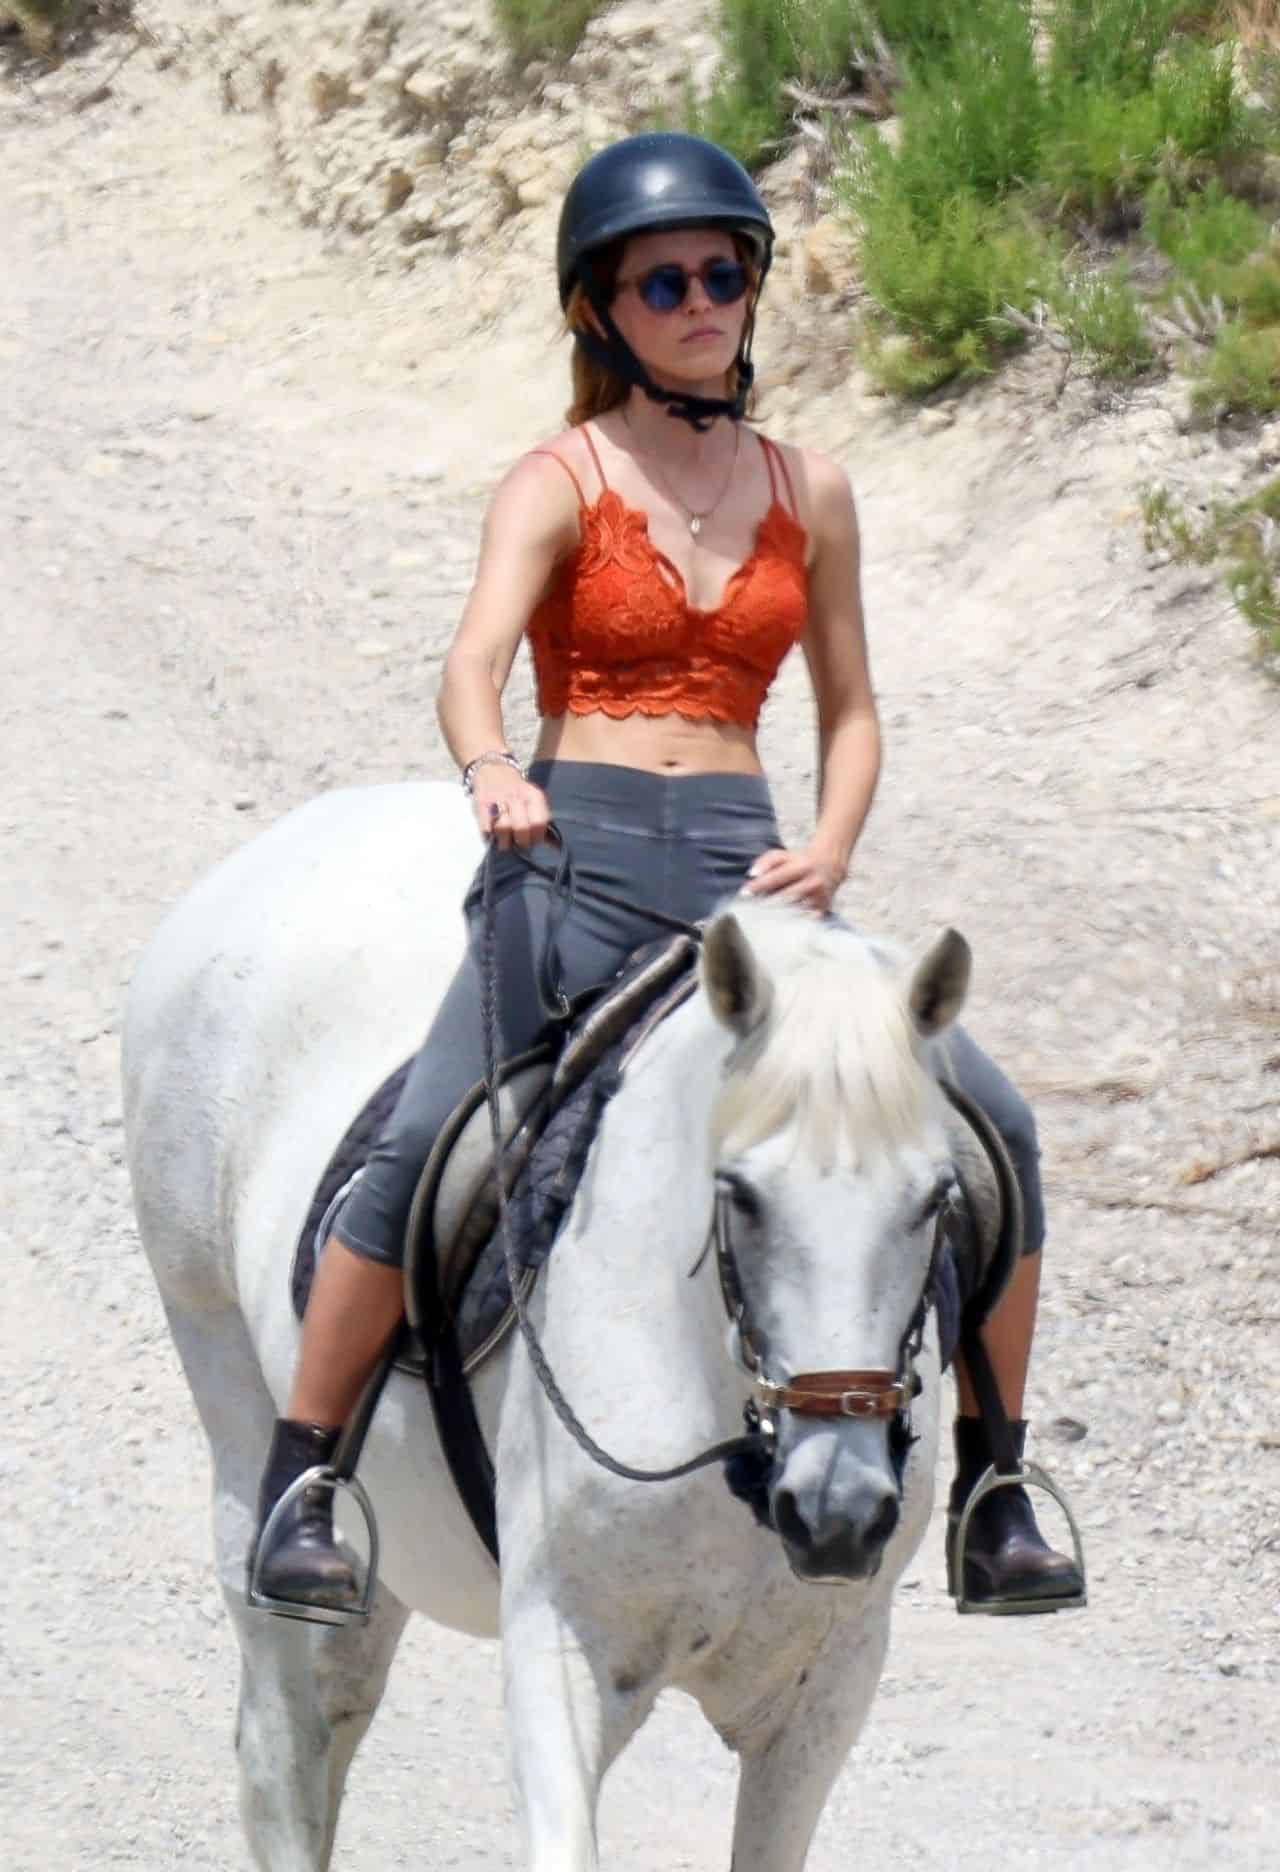 Emma Watson Wore a Lace Bralette as She was on a Horseback Ride in Ibiza